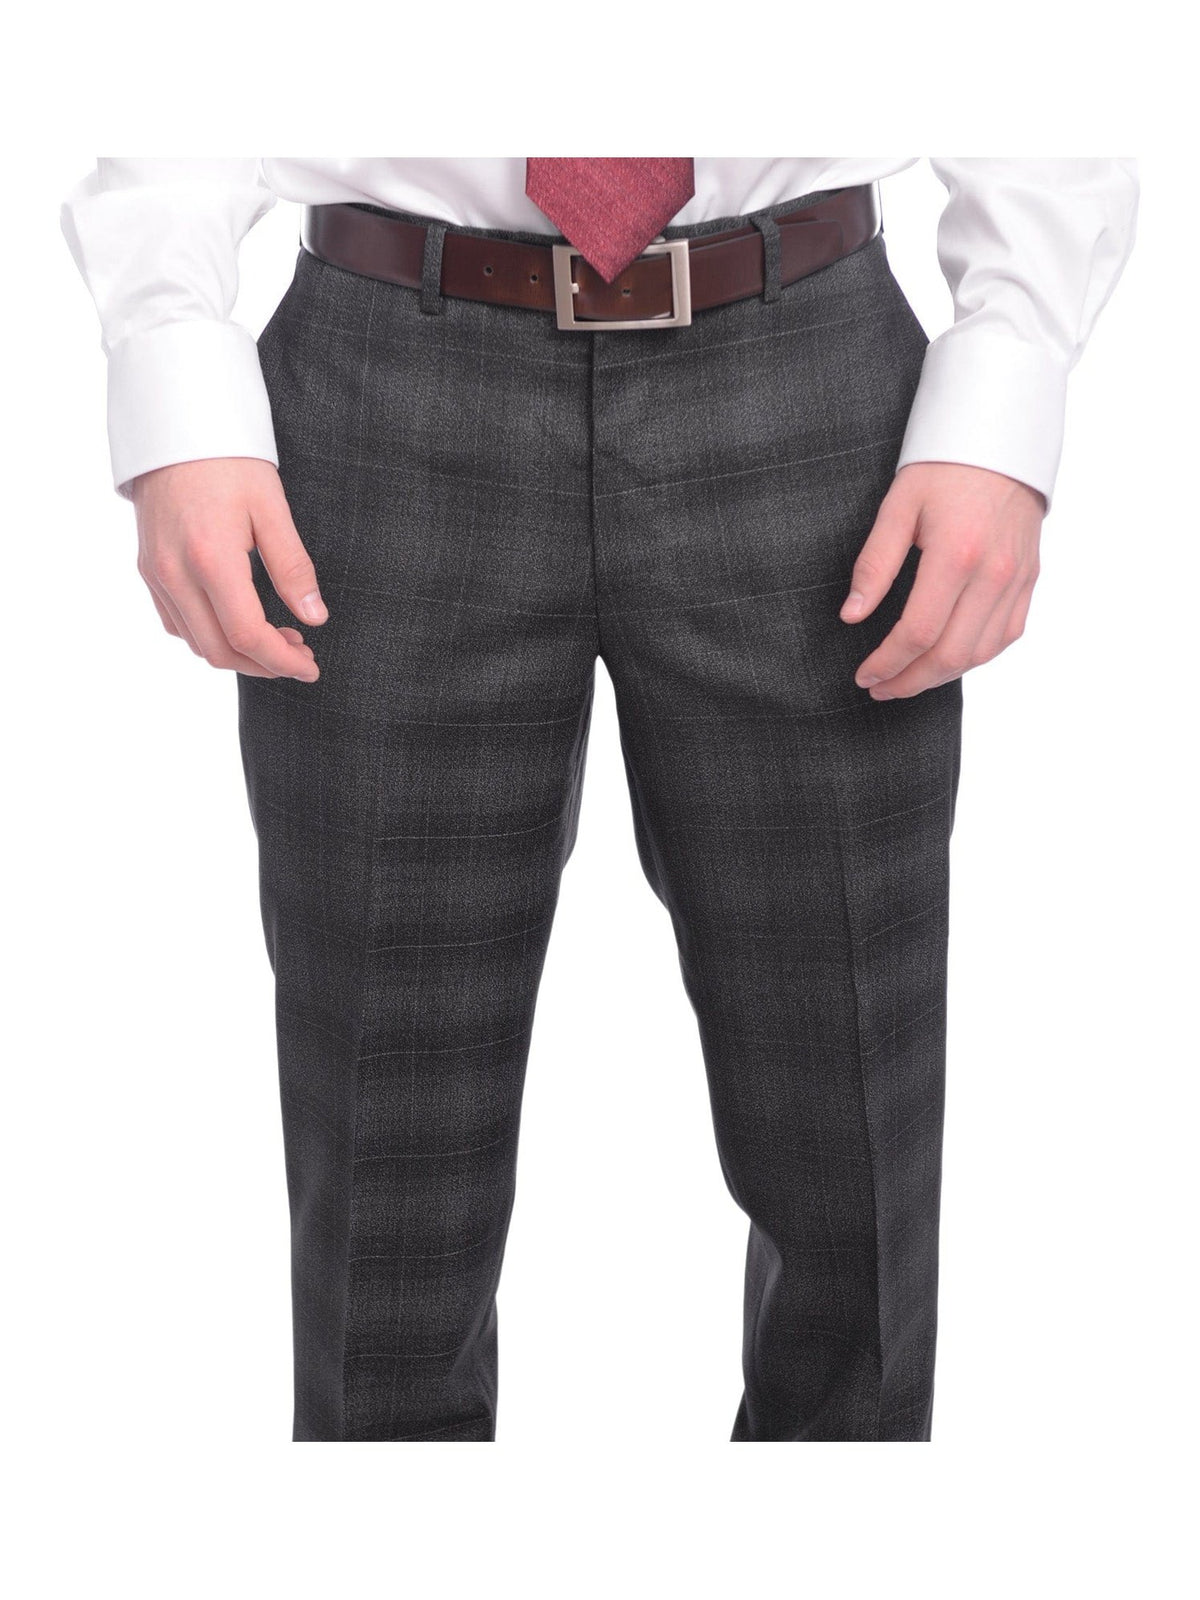 Napoli TWO PIECE SUITS Napoli Slim Fit Charcoal Gray Windowpane Plaid Half Canvassed Wool Suit